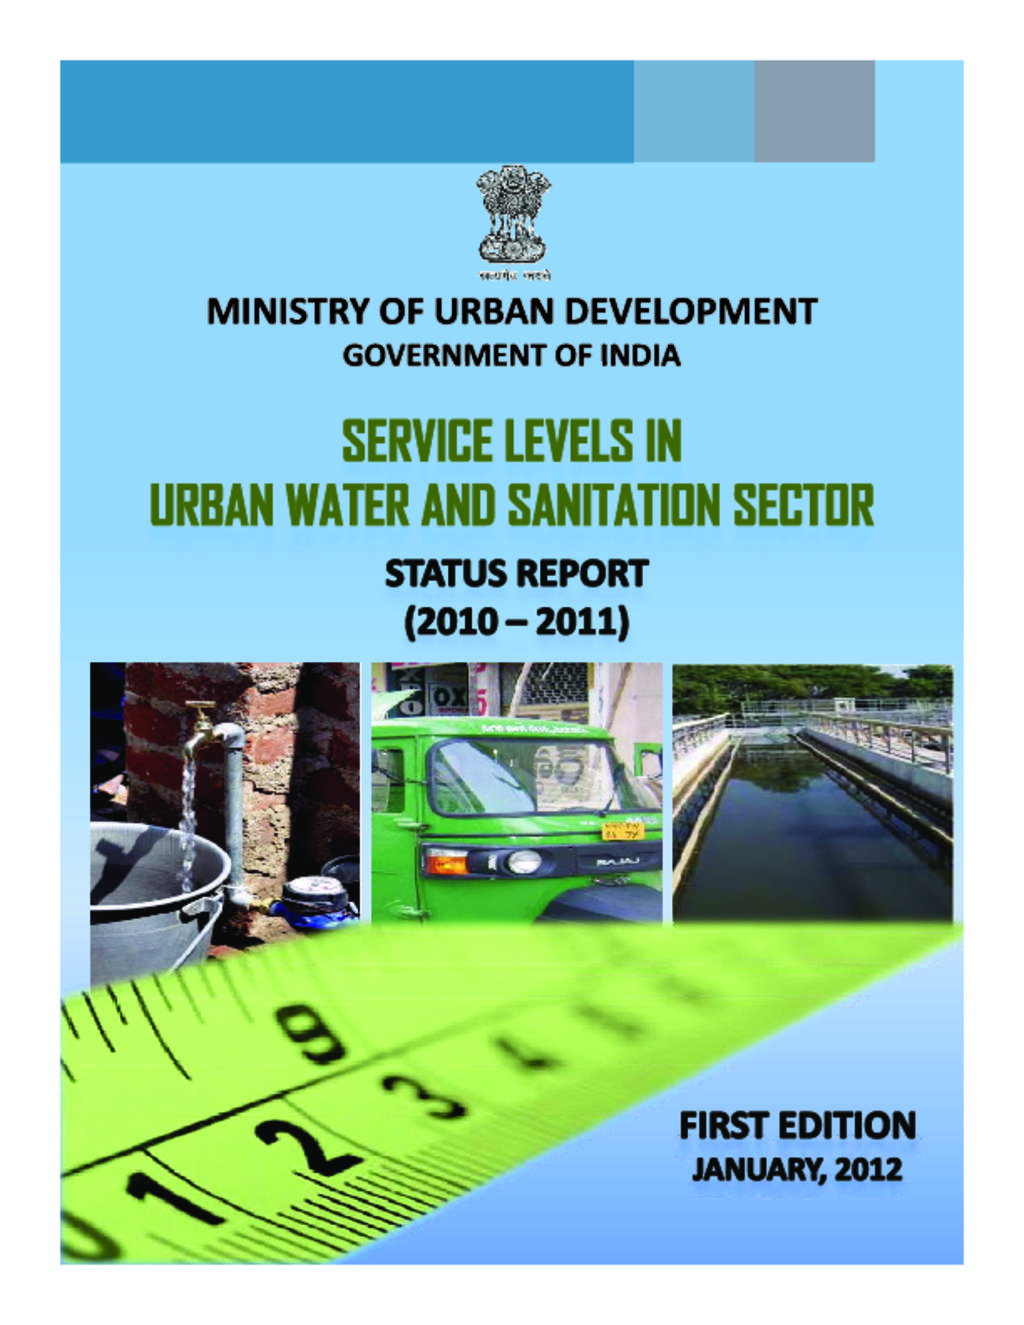 Service levels in Urban Water and Sanitation Sector - A Status Report (2010-2011)